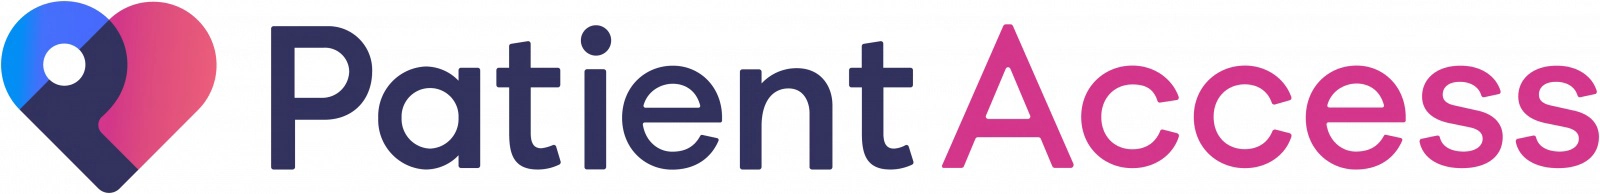 Image depicts the Patient Access logo